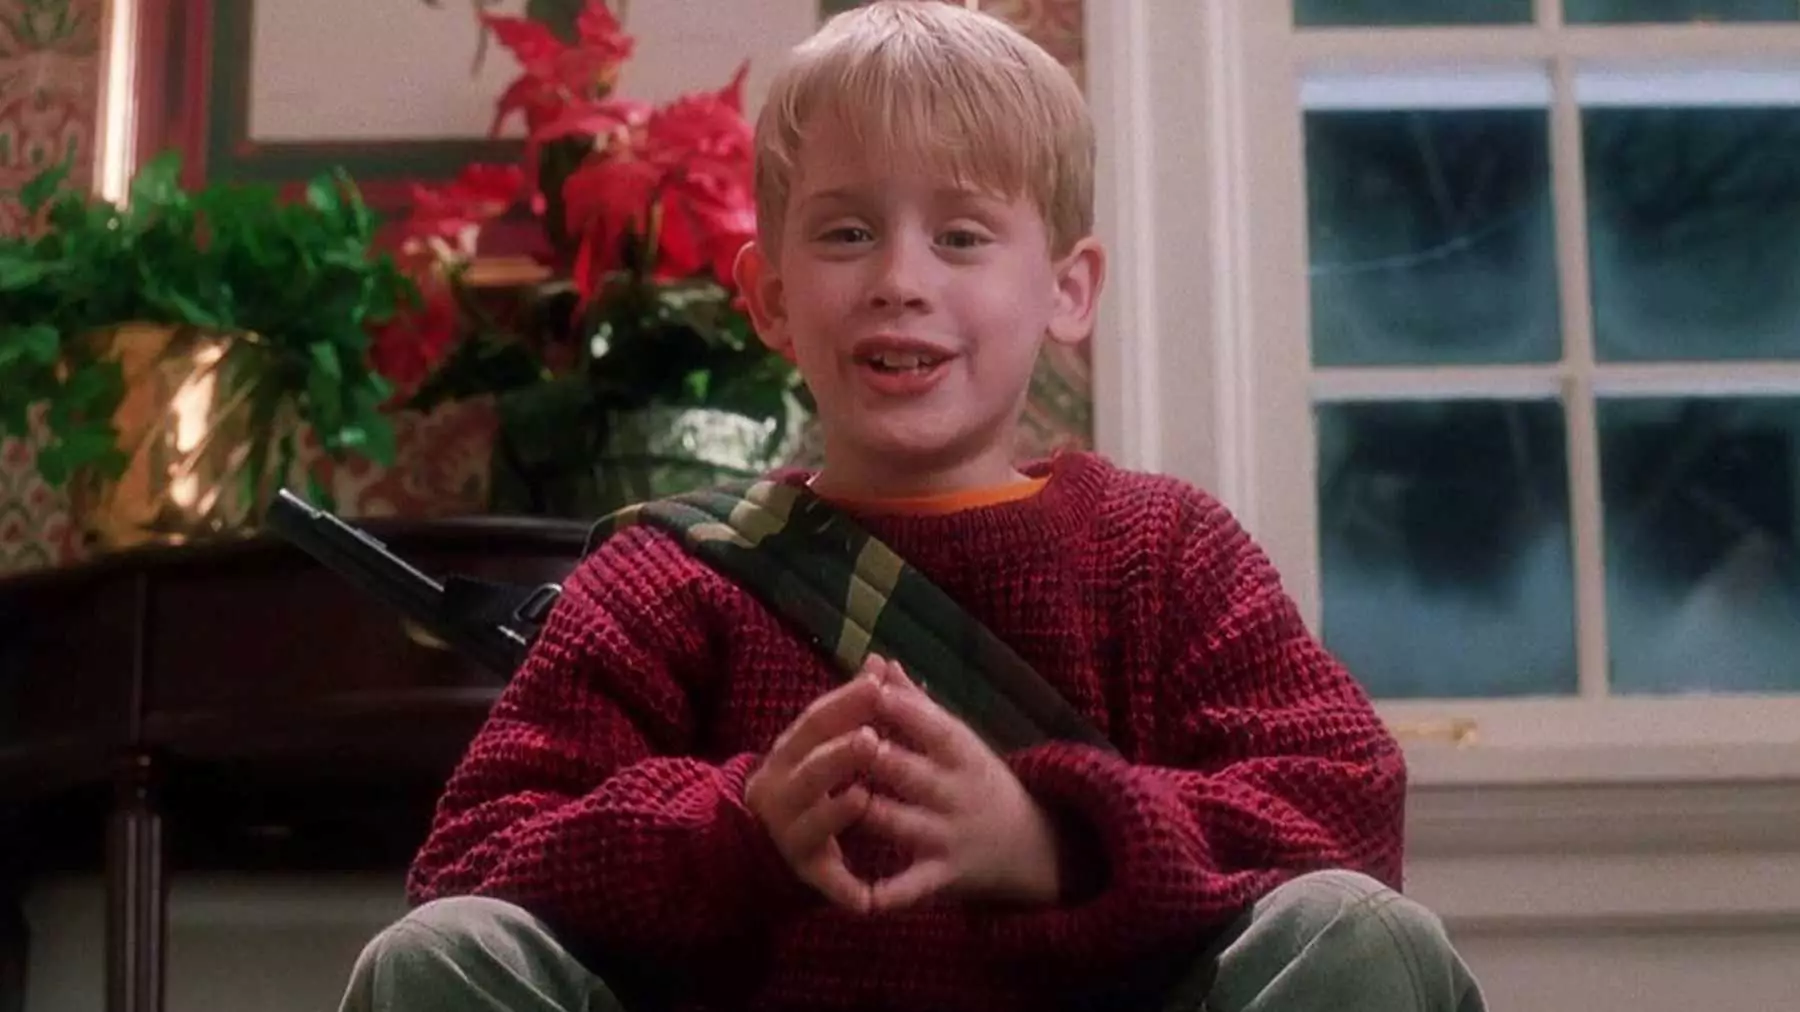 'Home Alone' stars Macauley Culkin as the eight-year-old who is left home alone by mistake at Christmas (